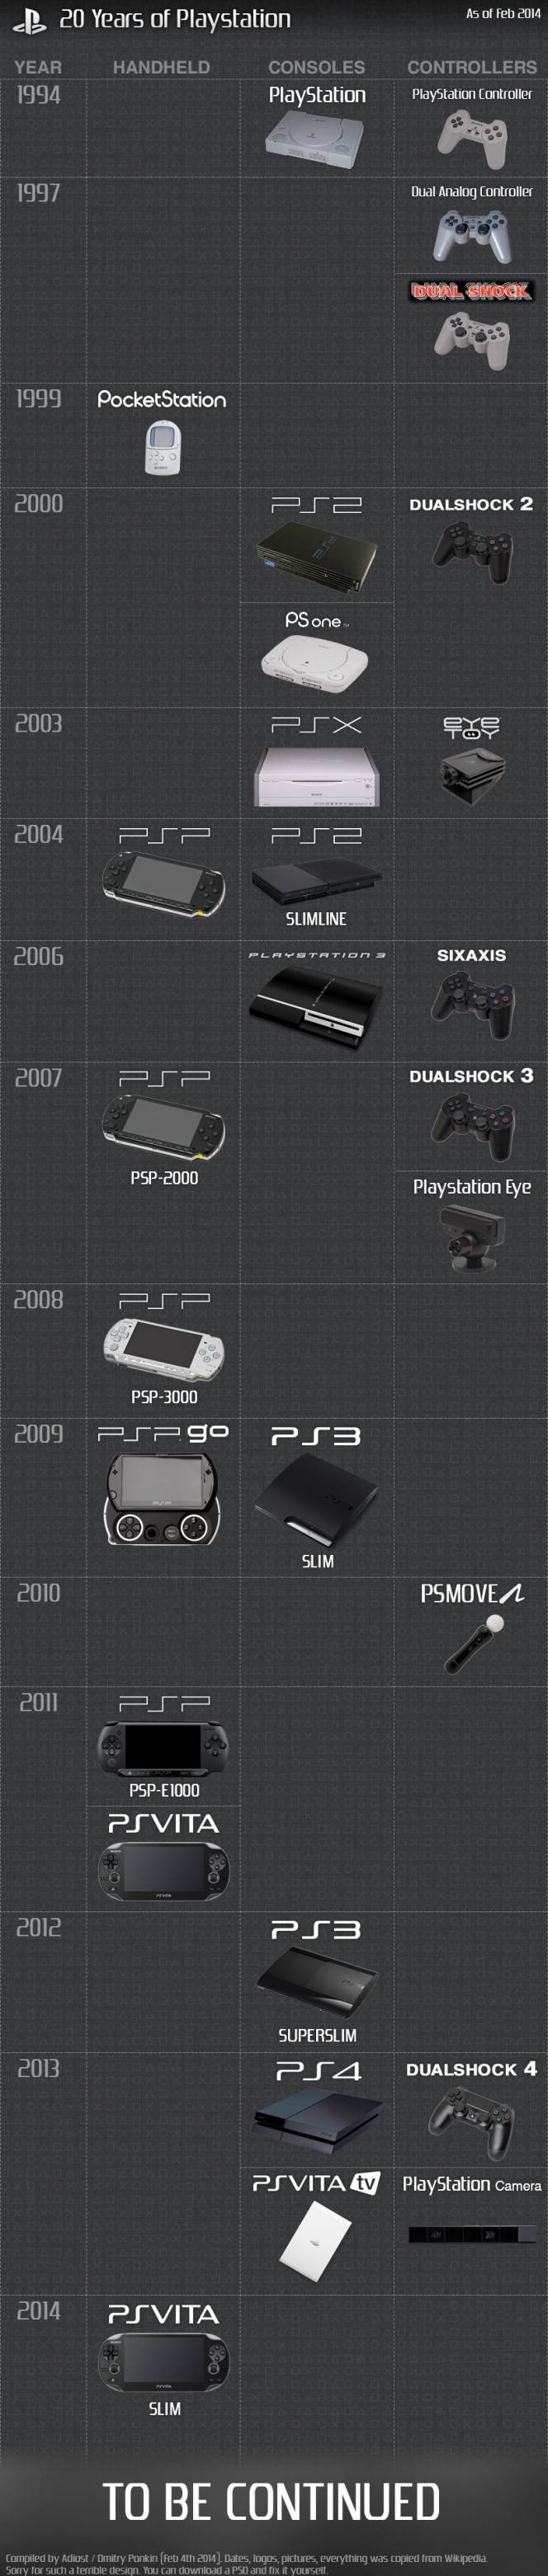 20 years of playstation